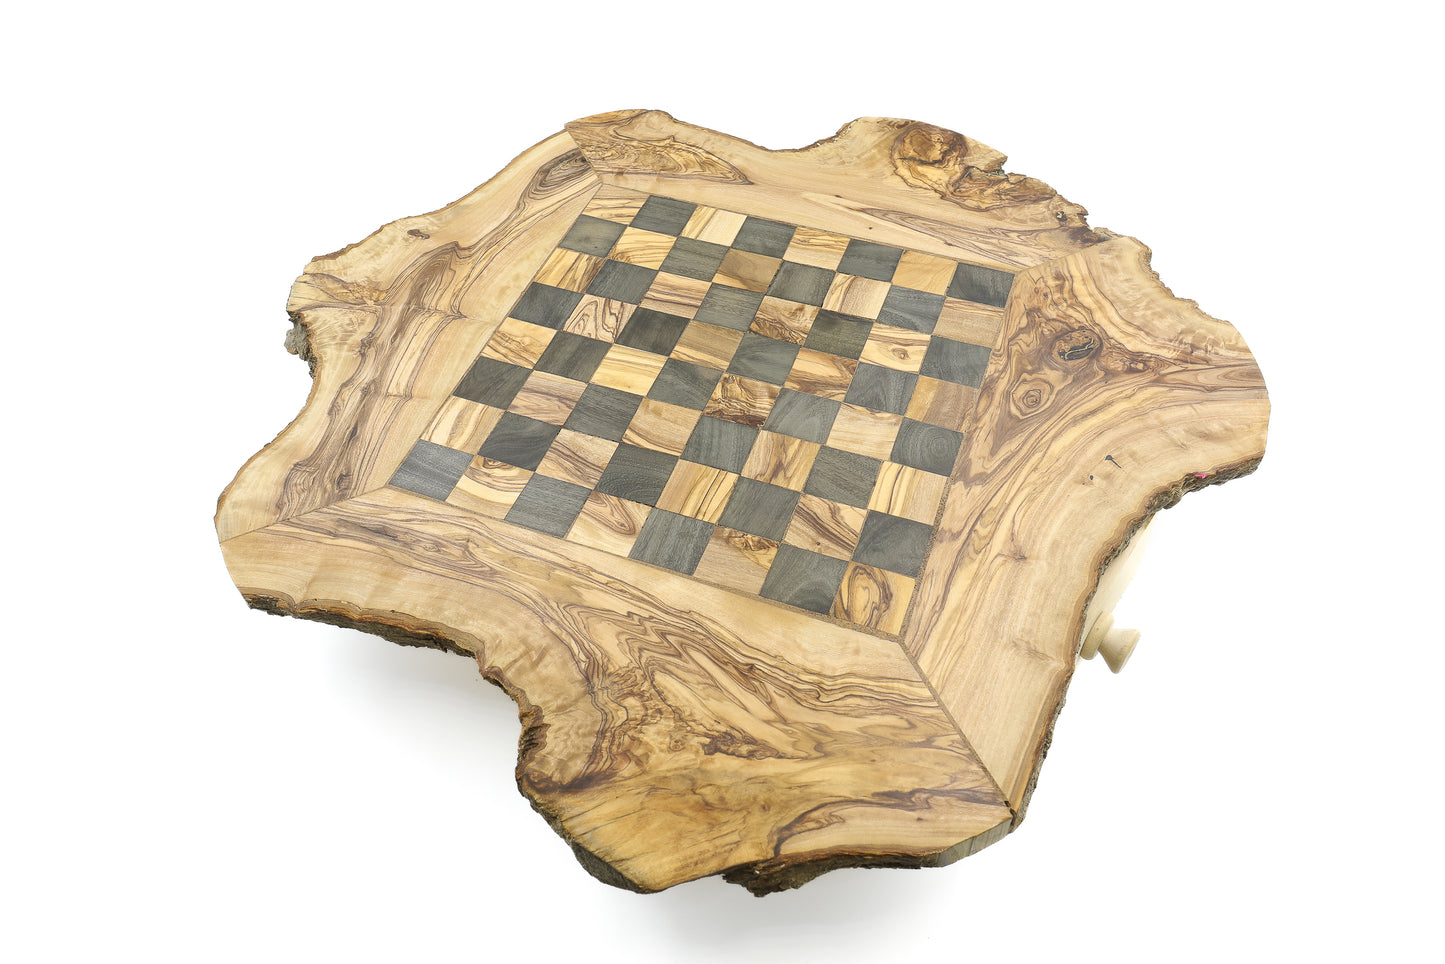 A complete chess set made from olive wood, both board and pieces included